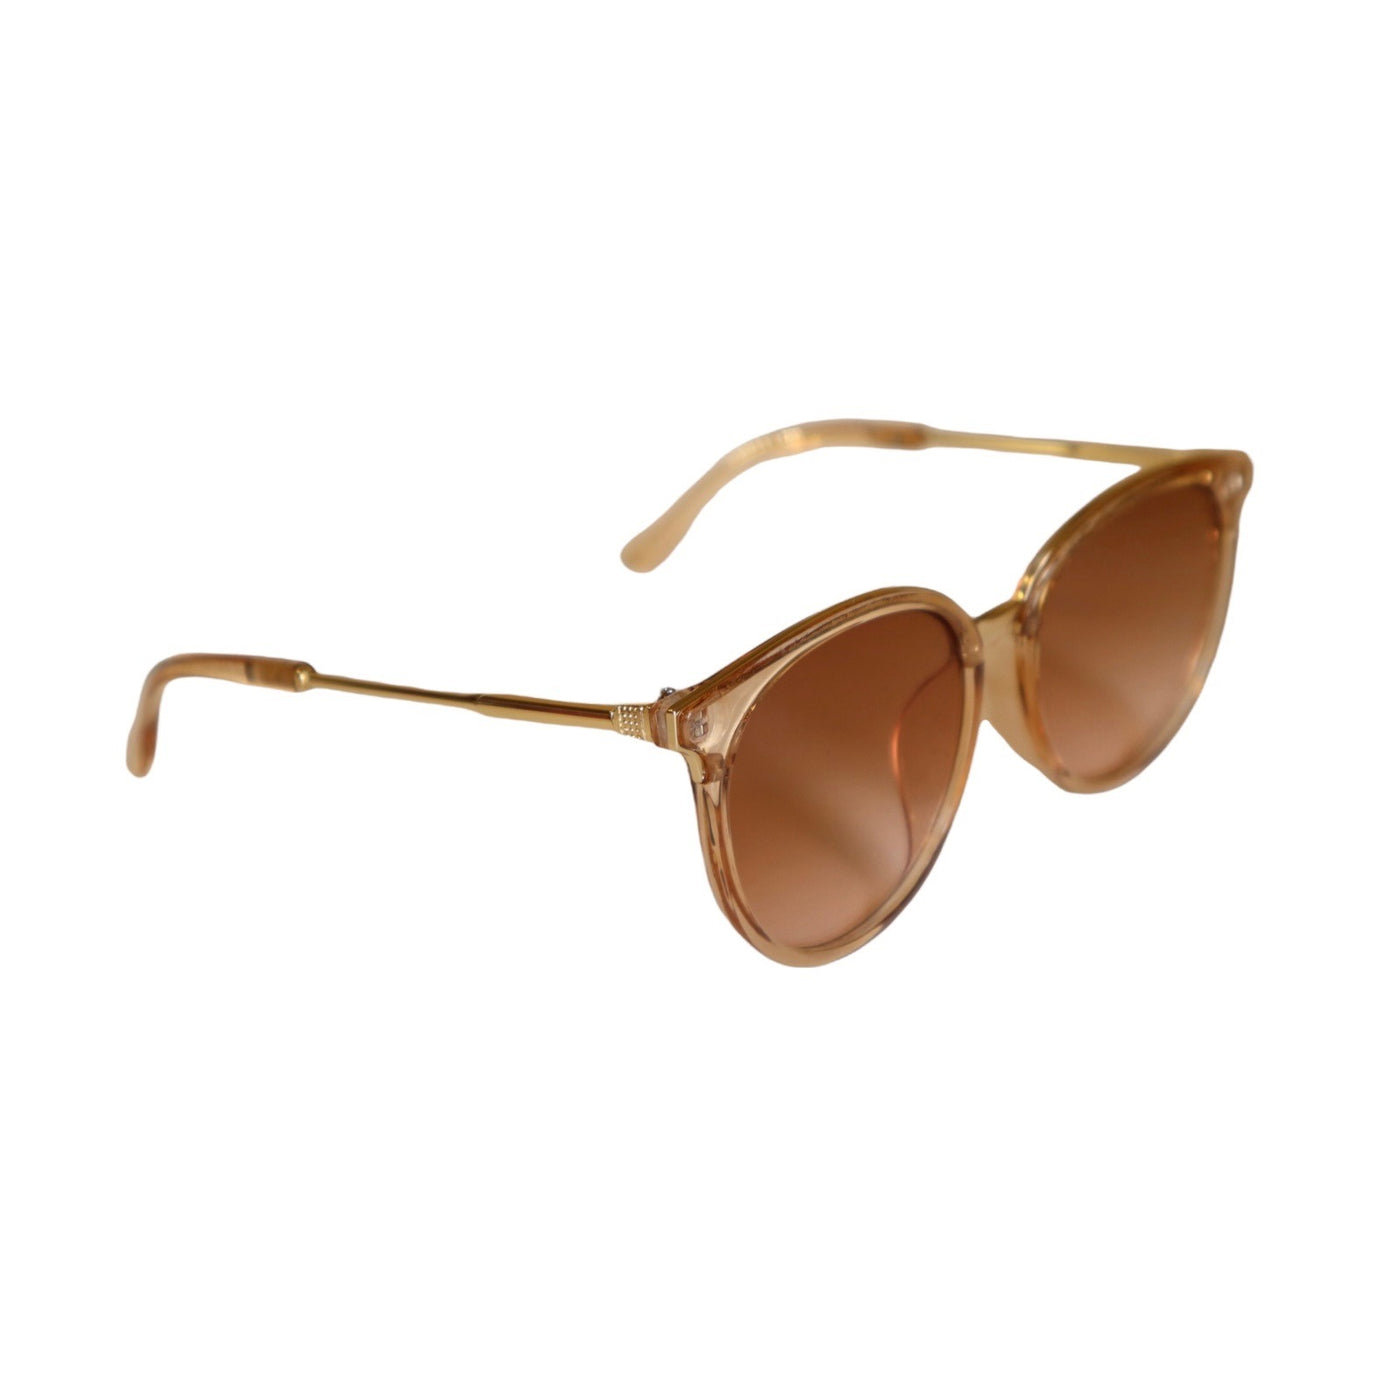 Retro Babe Rounded Cat Eye Sunglasses Brown/Gold Tone Frame with Brown/Tan Lens